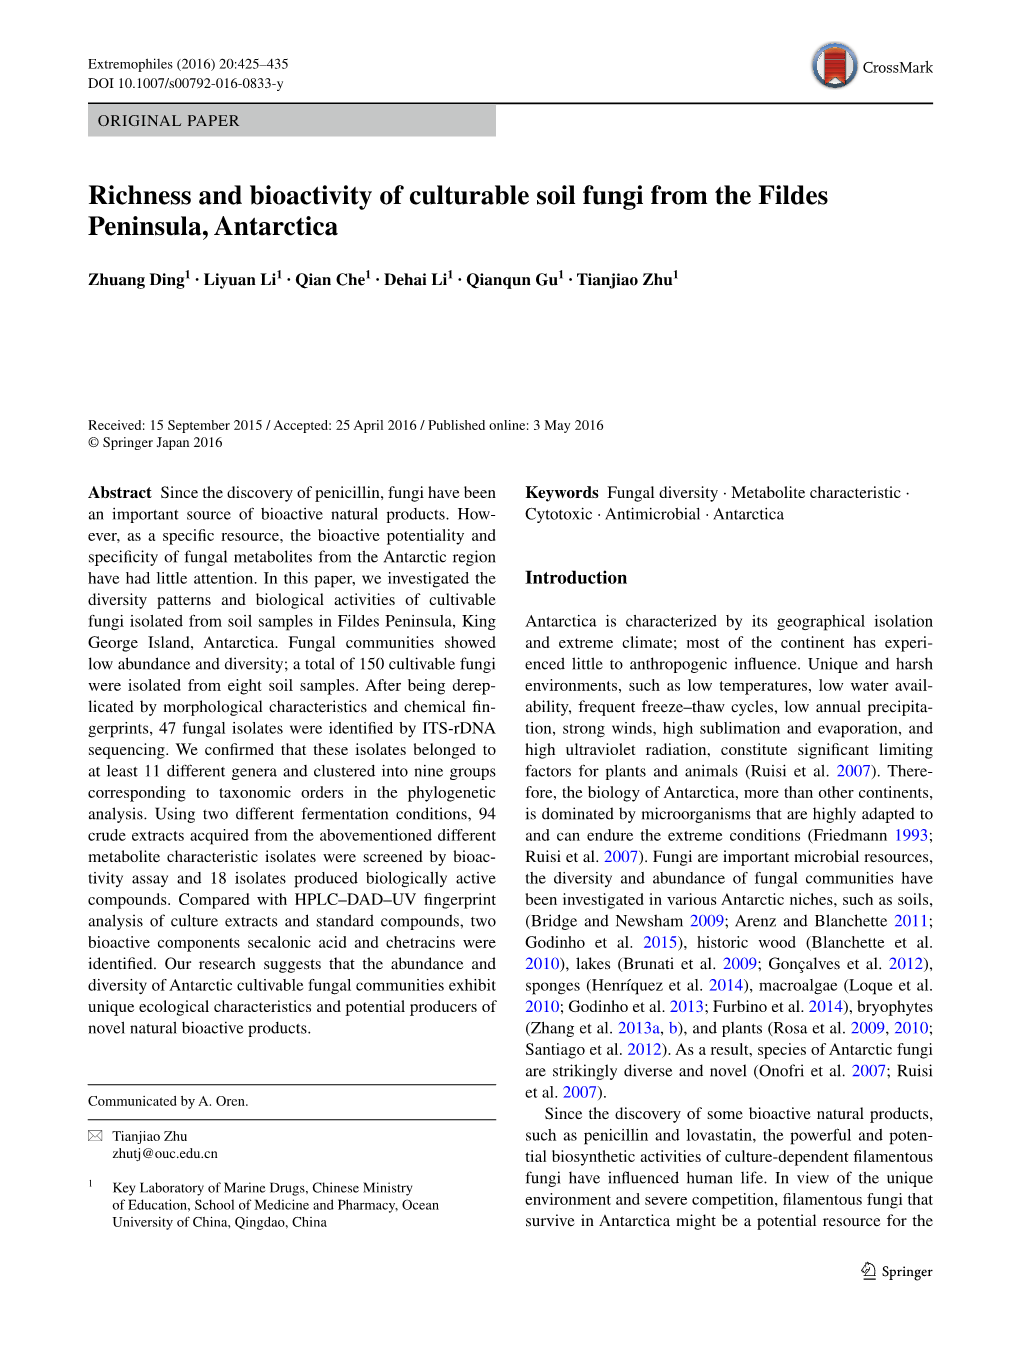 Richness and Bioactivity of Culturable Soil Fungi from the Fildes Peninsula, Antarctica